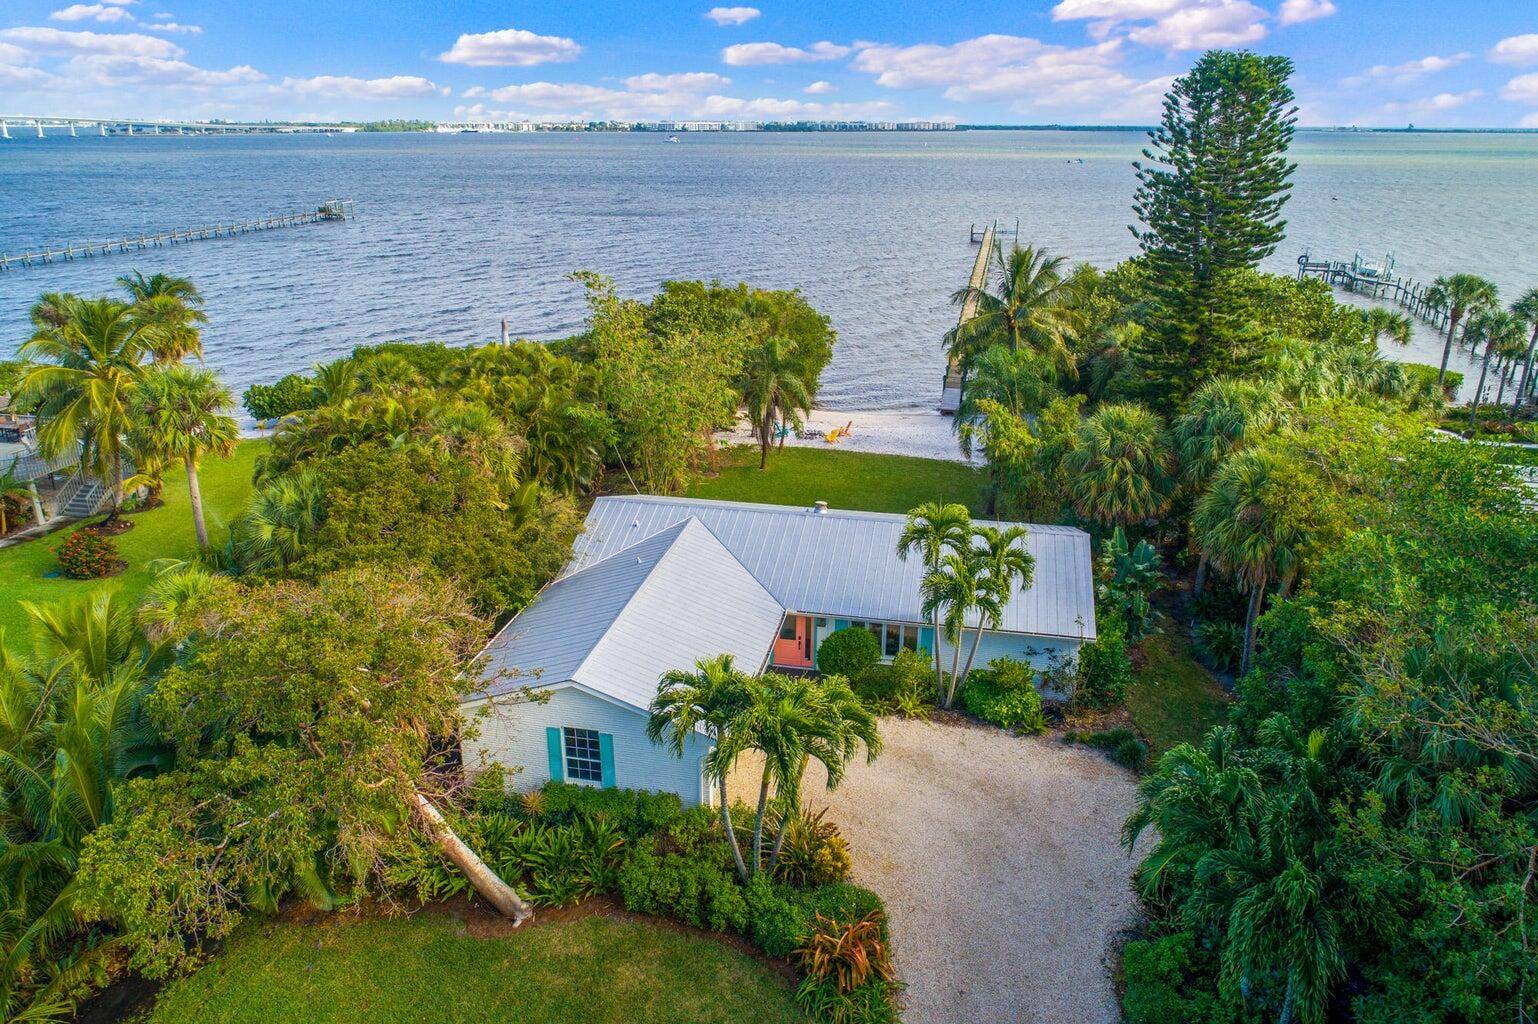 Charming and private beach cottage with a brand new infinty pool and it's own dock for boaters and fisherman.